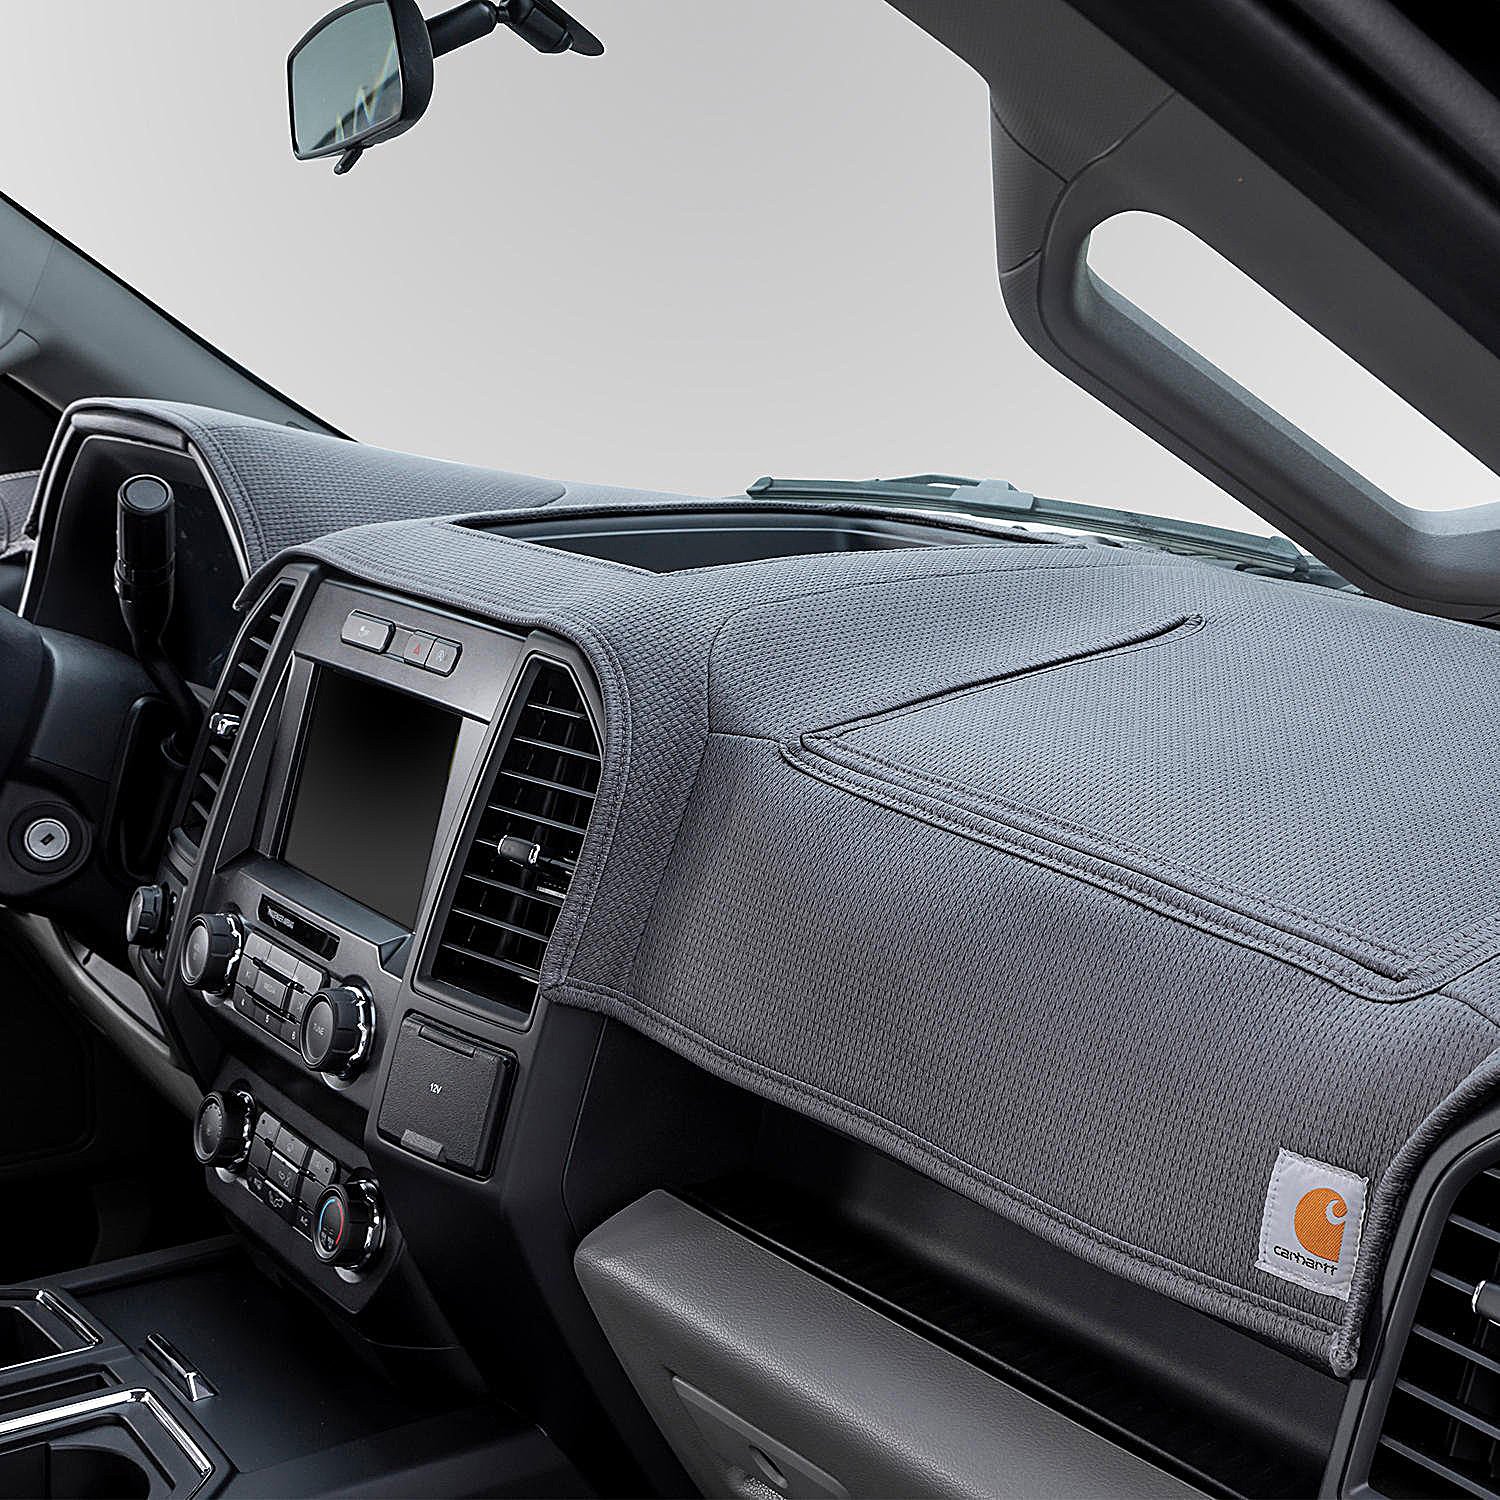 https://www.quadratec.com/sites/default/files/styles/product_zoomed/public/product_images/covercraft-carhartt-limited-edition-custom-dash-cover-gravel-11-14-jeep-wrangler-jk-without-light-sensor-381912-00-10-tabletop-main_1.jpg